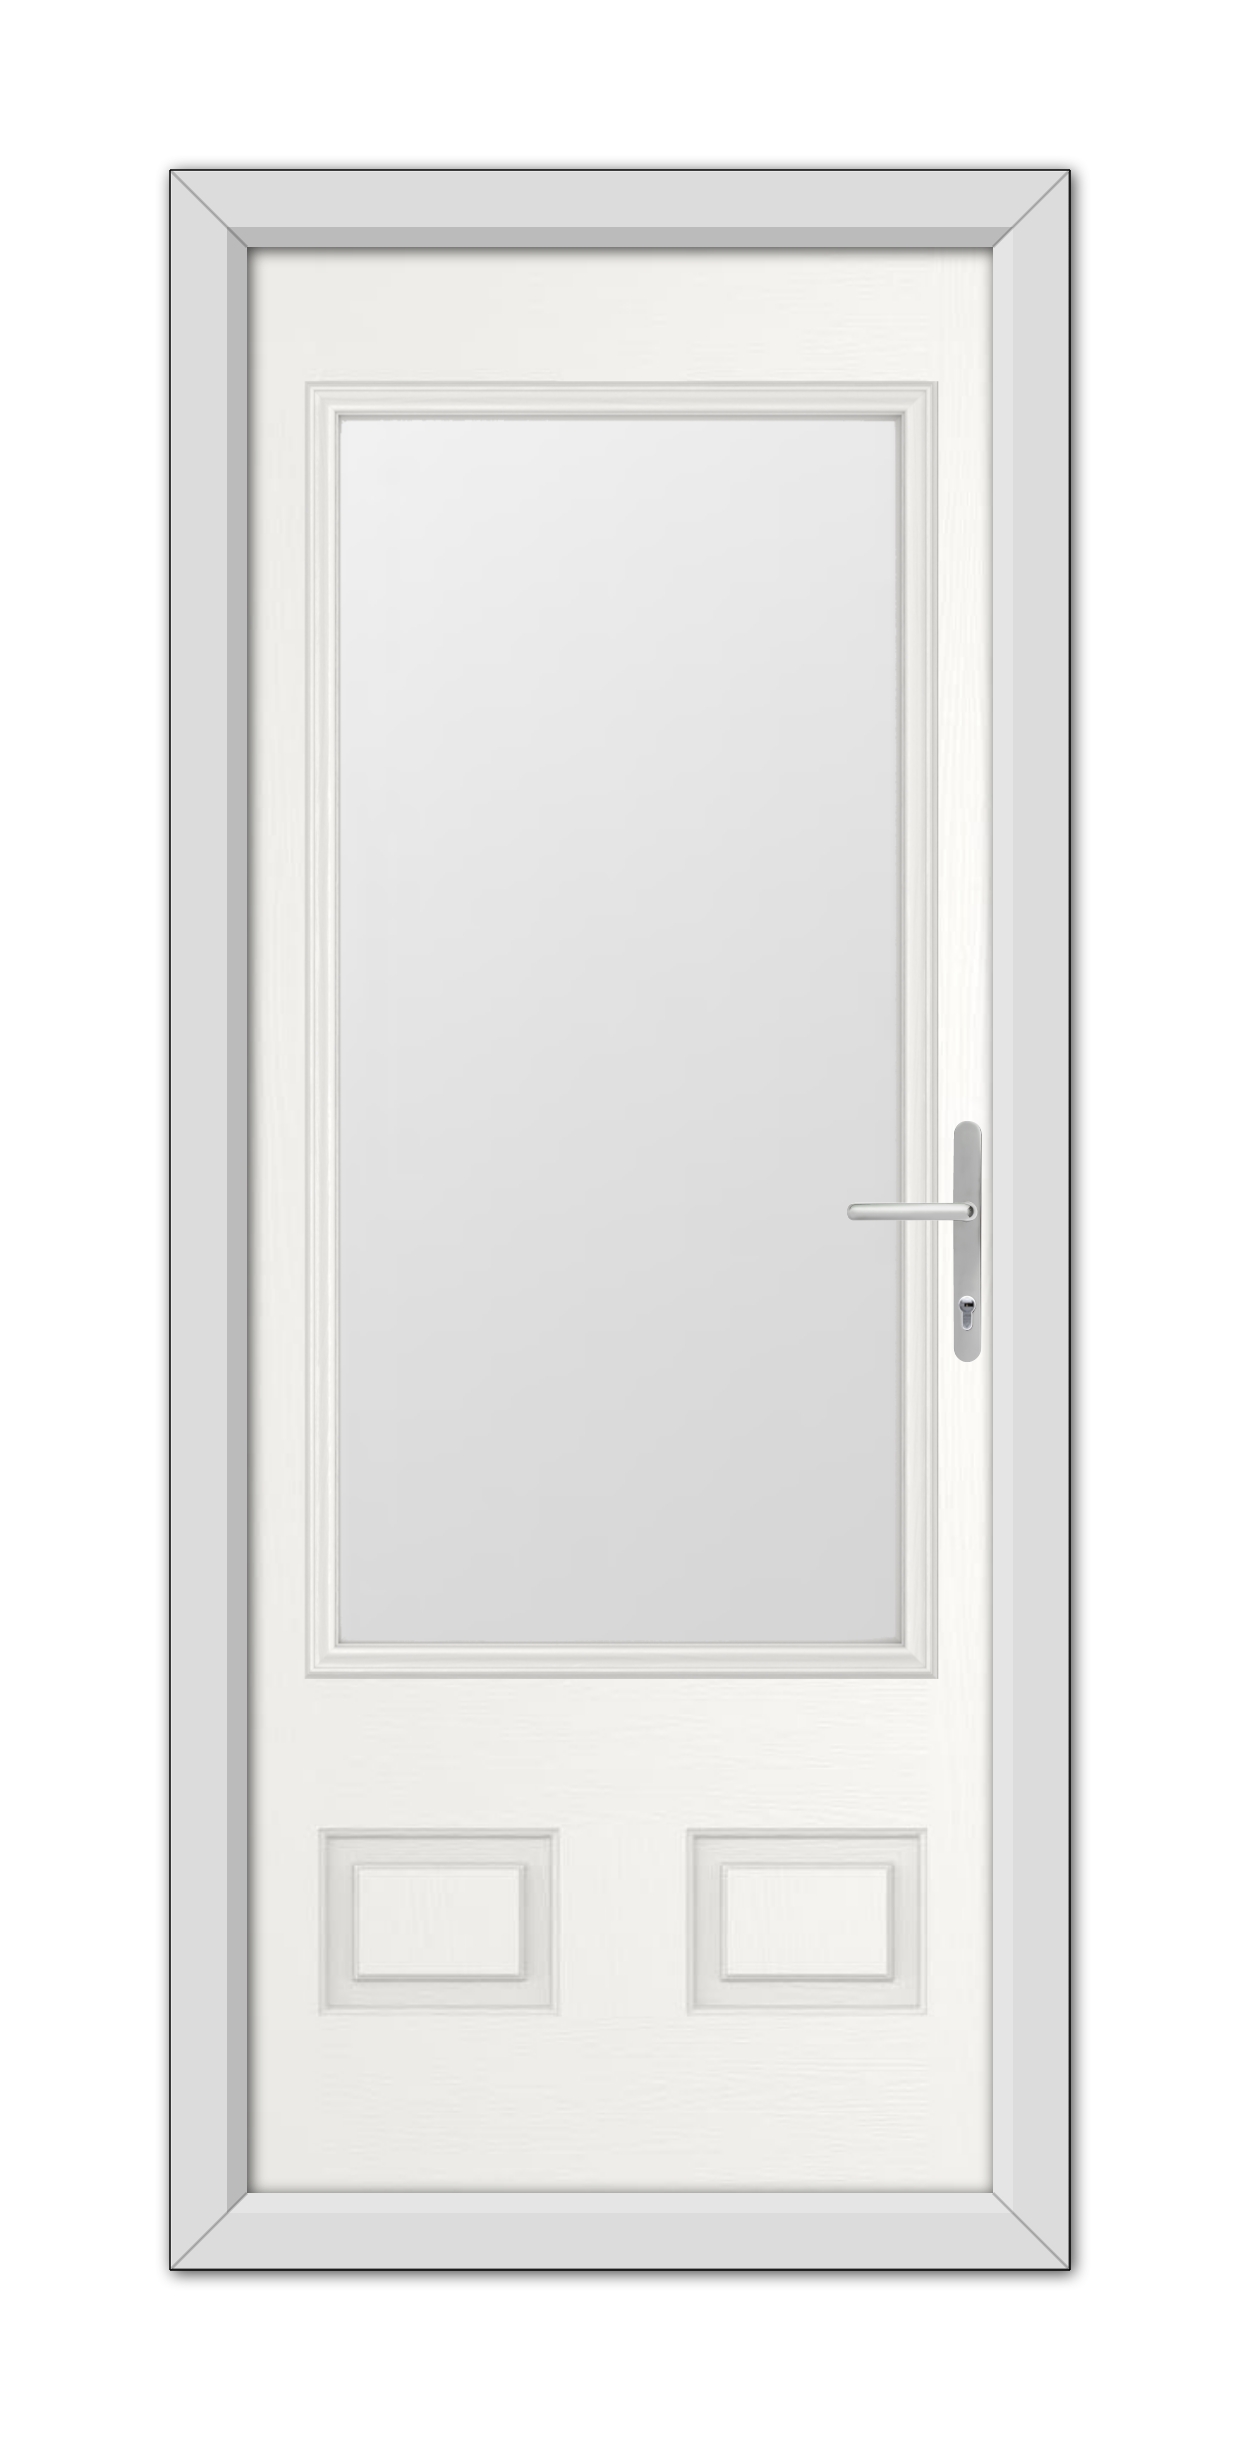 A White Walcot Composite Door 48mm Timber Core with a metal handle, framed within a simple molding, featuring a rectangular panel at the bottom and a larger frosted glass window.